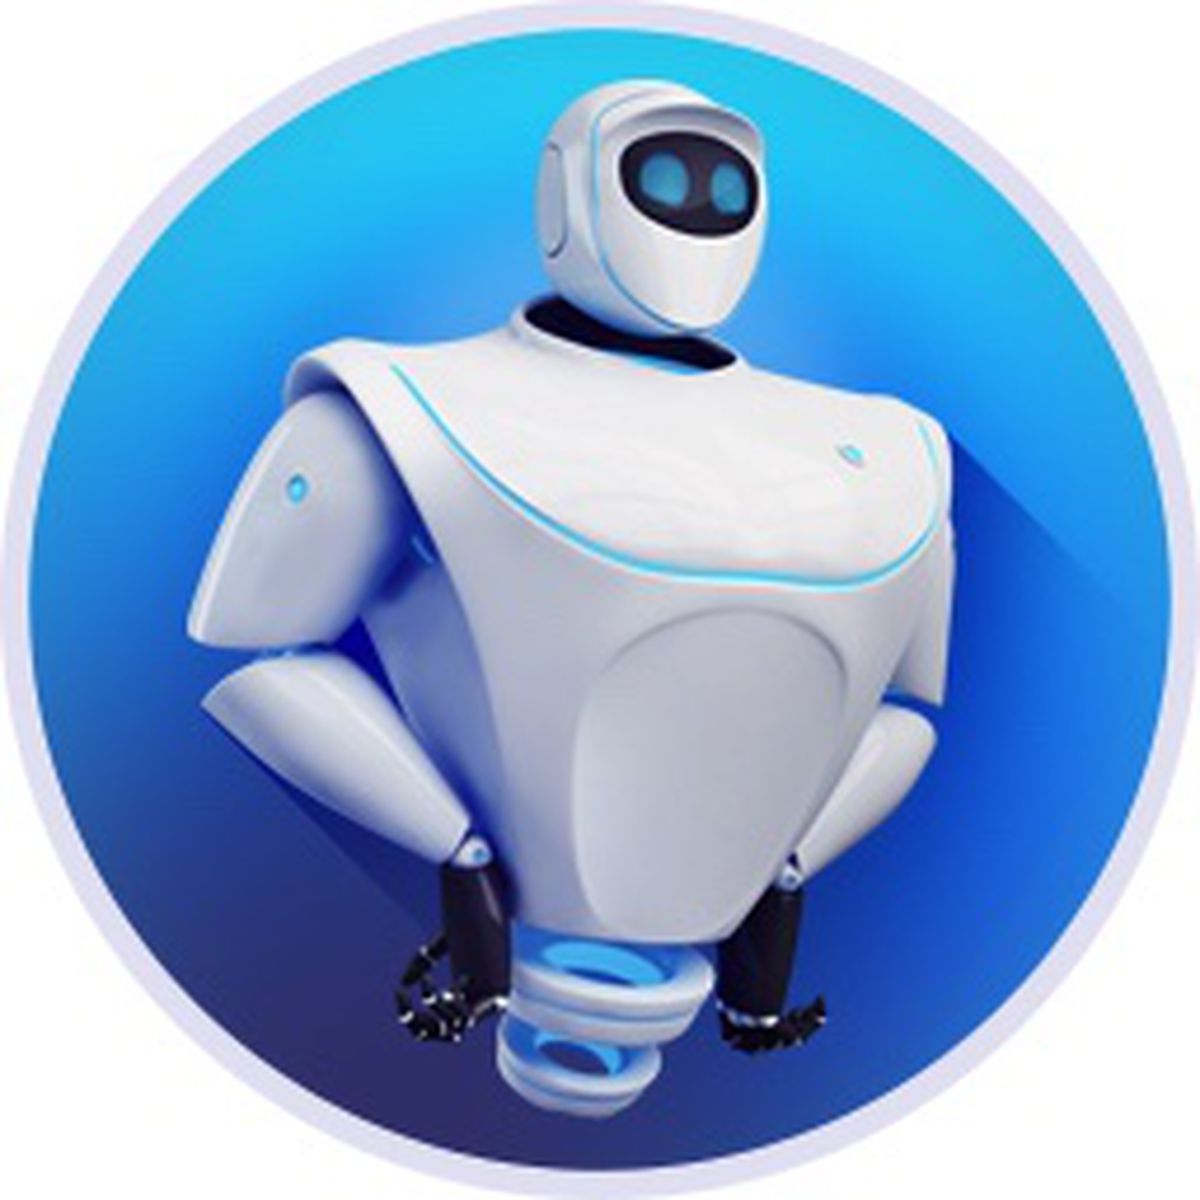 MacKeeper 6.1.0 Crack + Activation Code (100% Working) Full Latest Version Download 2022